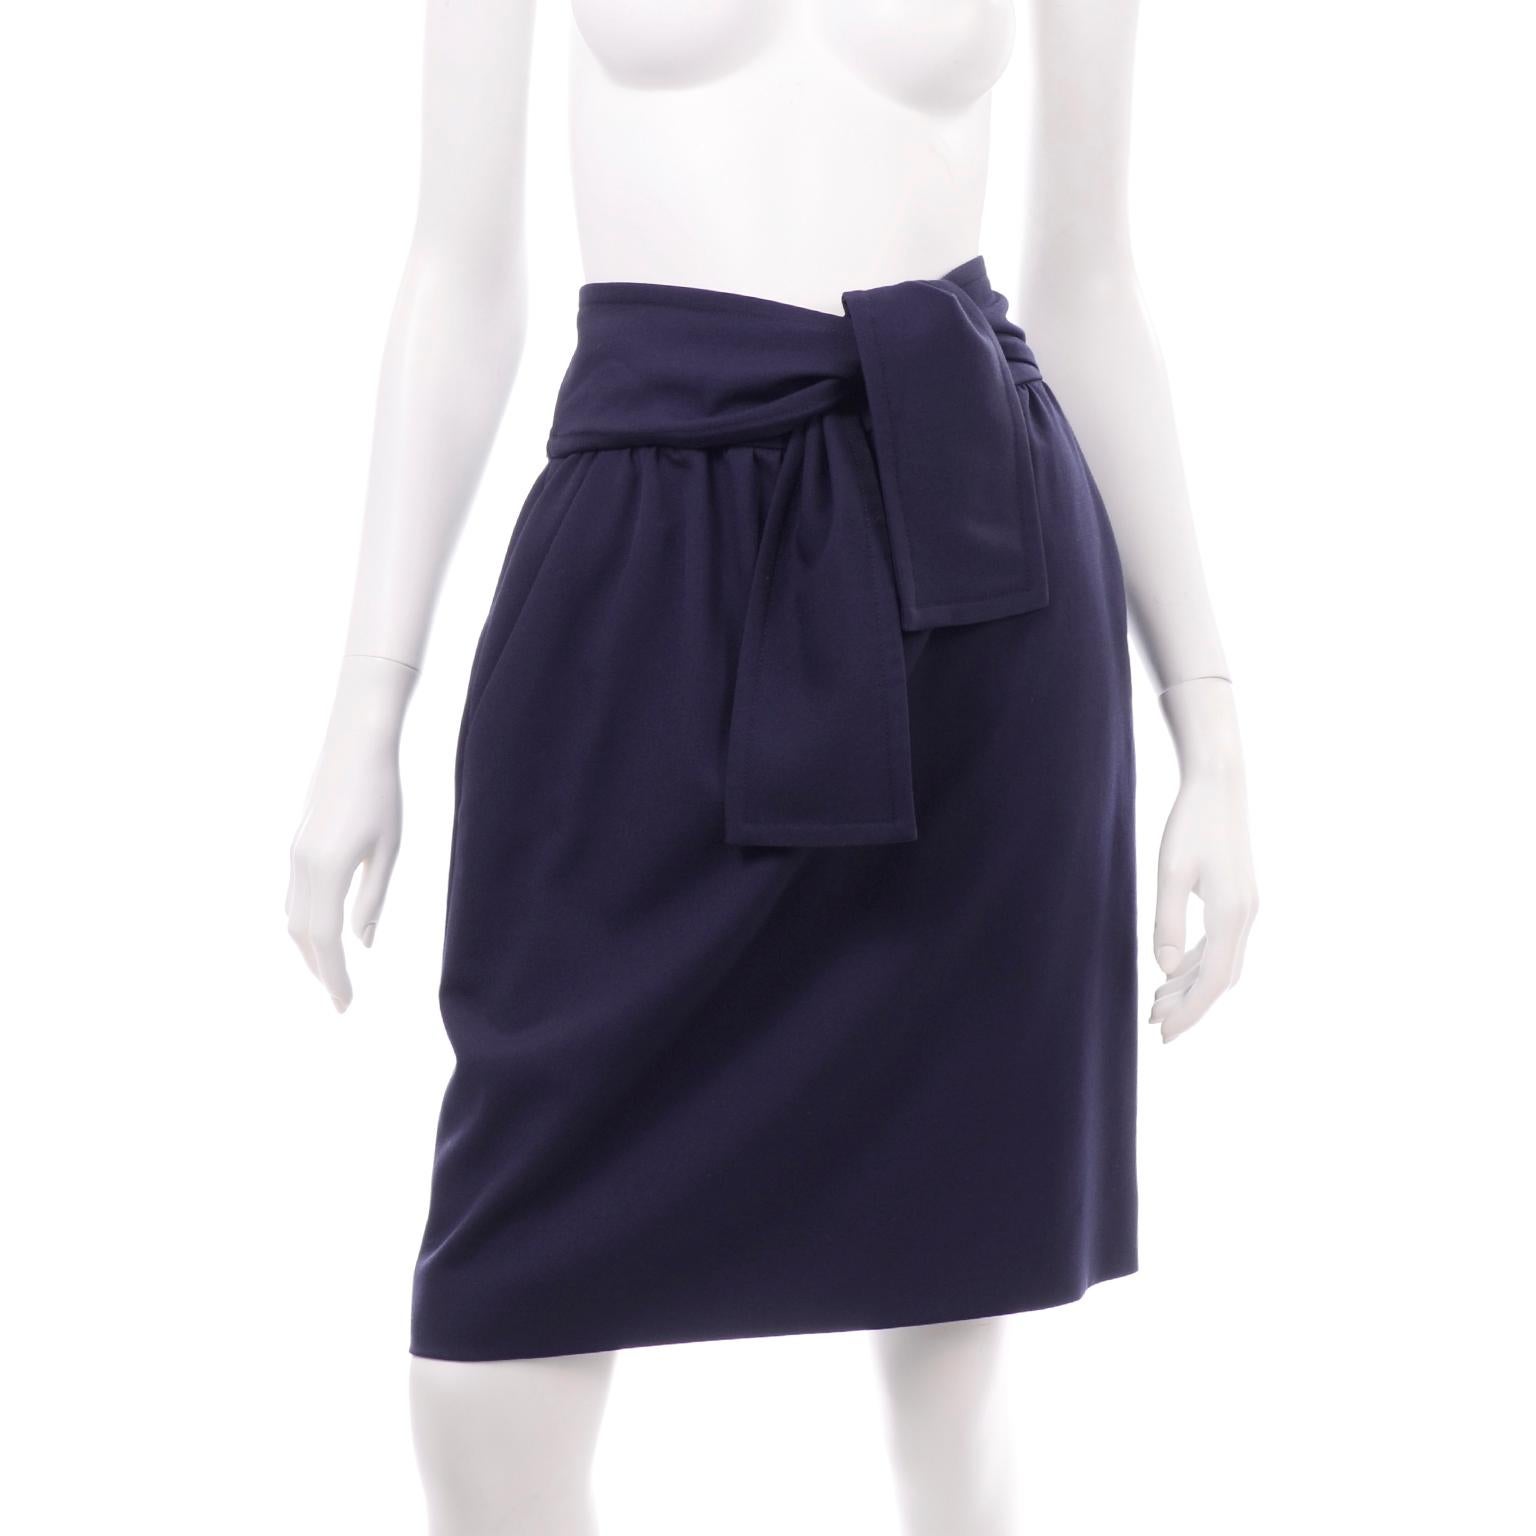 This Chloe navy blue wool skirt is the perfect wardrobe staple. The two large ties that are attached at the sides create a modified paper bag effect when tied in front. It has two side pockets at the hips, and is lined in a beautiful navy blue silk.